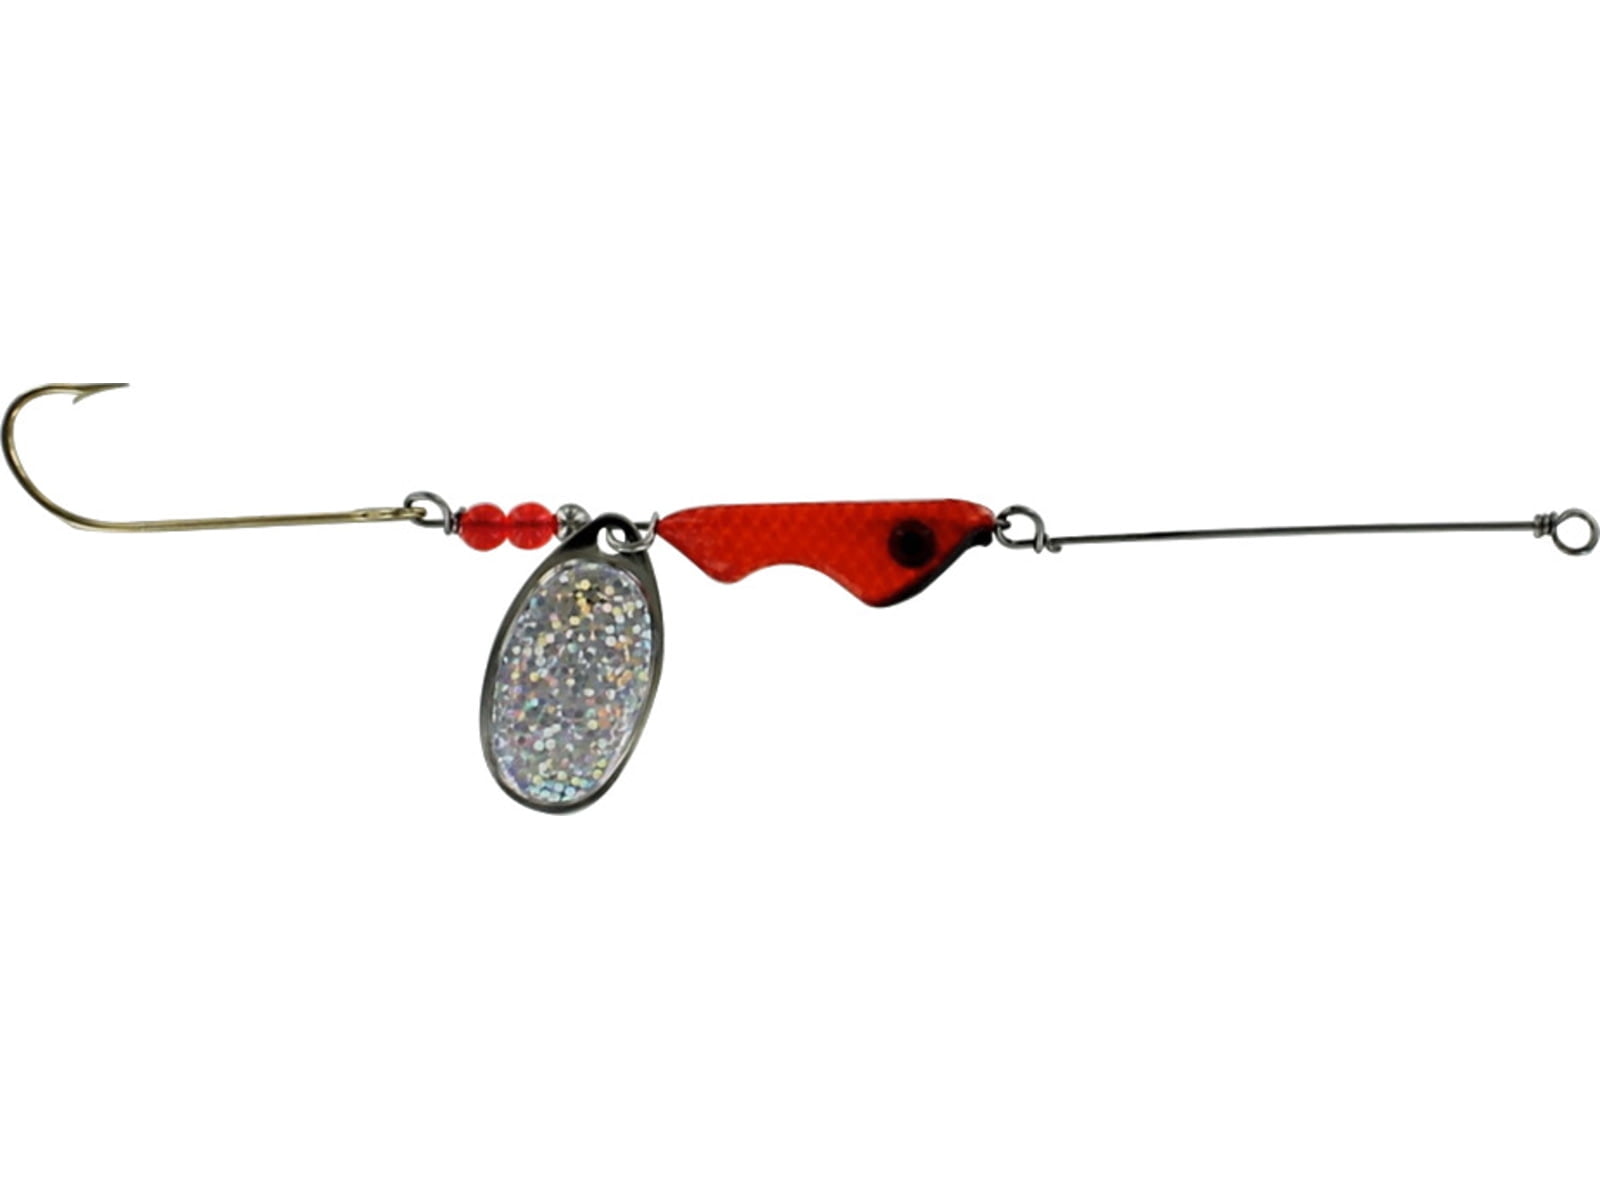 Erie Dearie Elite Series Spinner, 3/8oz, Tangy Craw, 